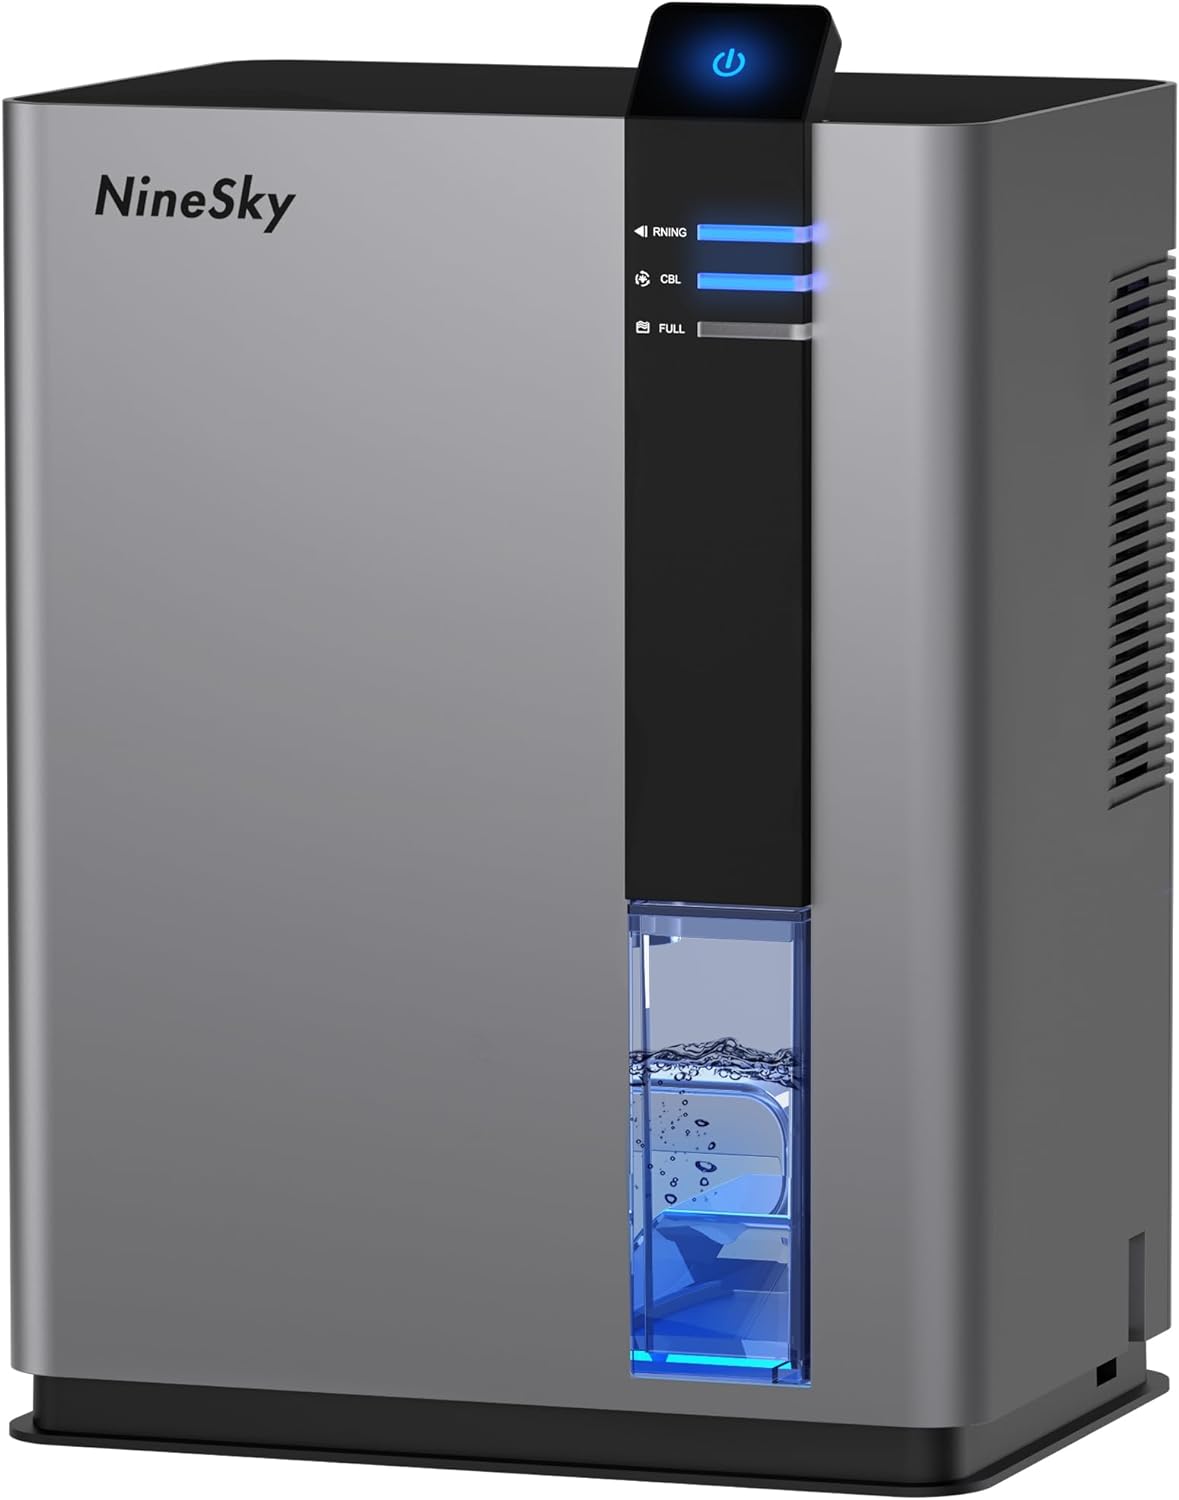 NineSky Dehumidifier for Home, 98 OZ Water Tank, (800 sq.ft) Dehumidifiers for Bathroom, Bedroom with Auto Shut Off, 5 Colors LED Light(H2 Gray)